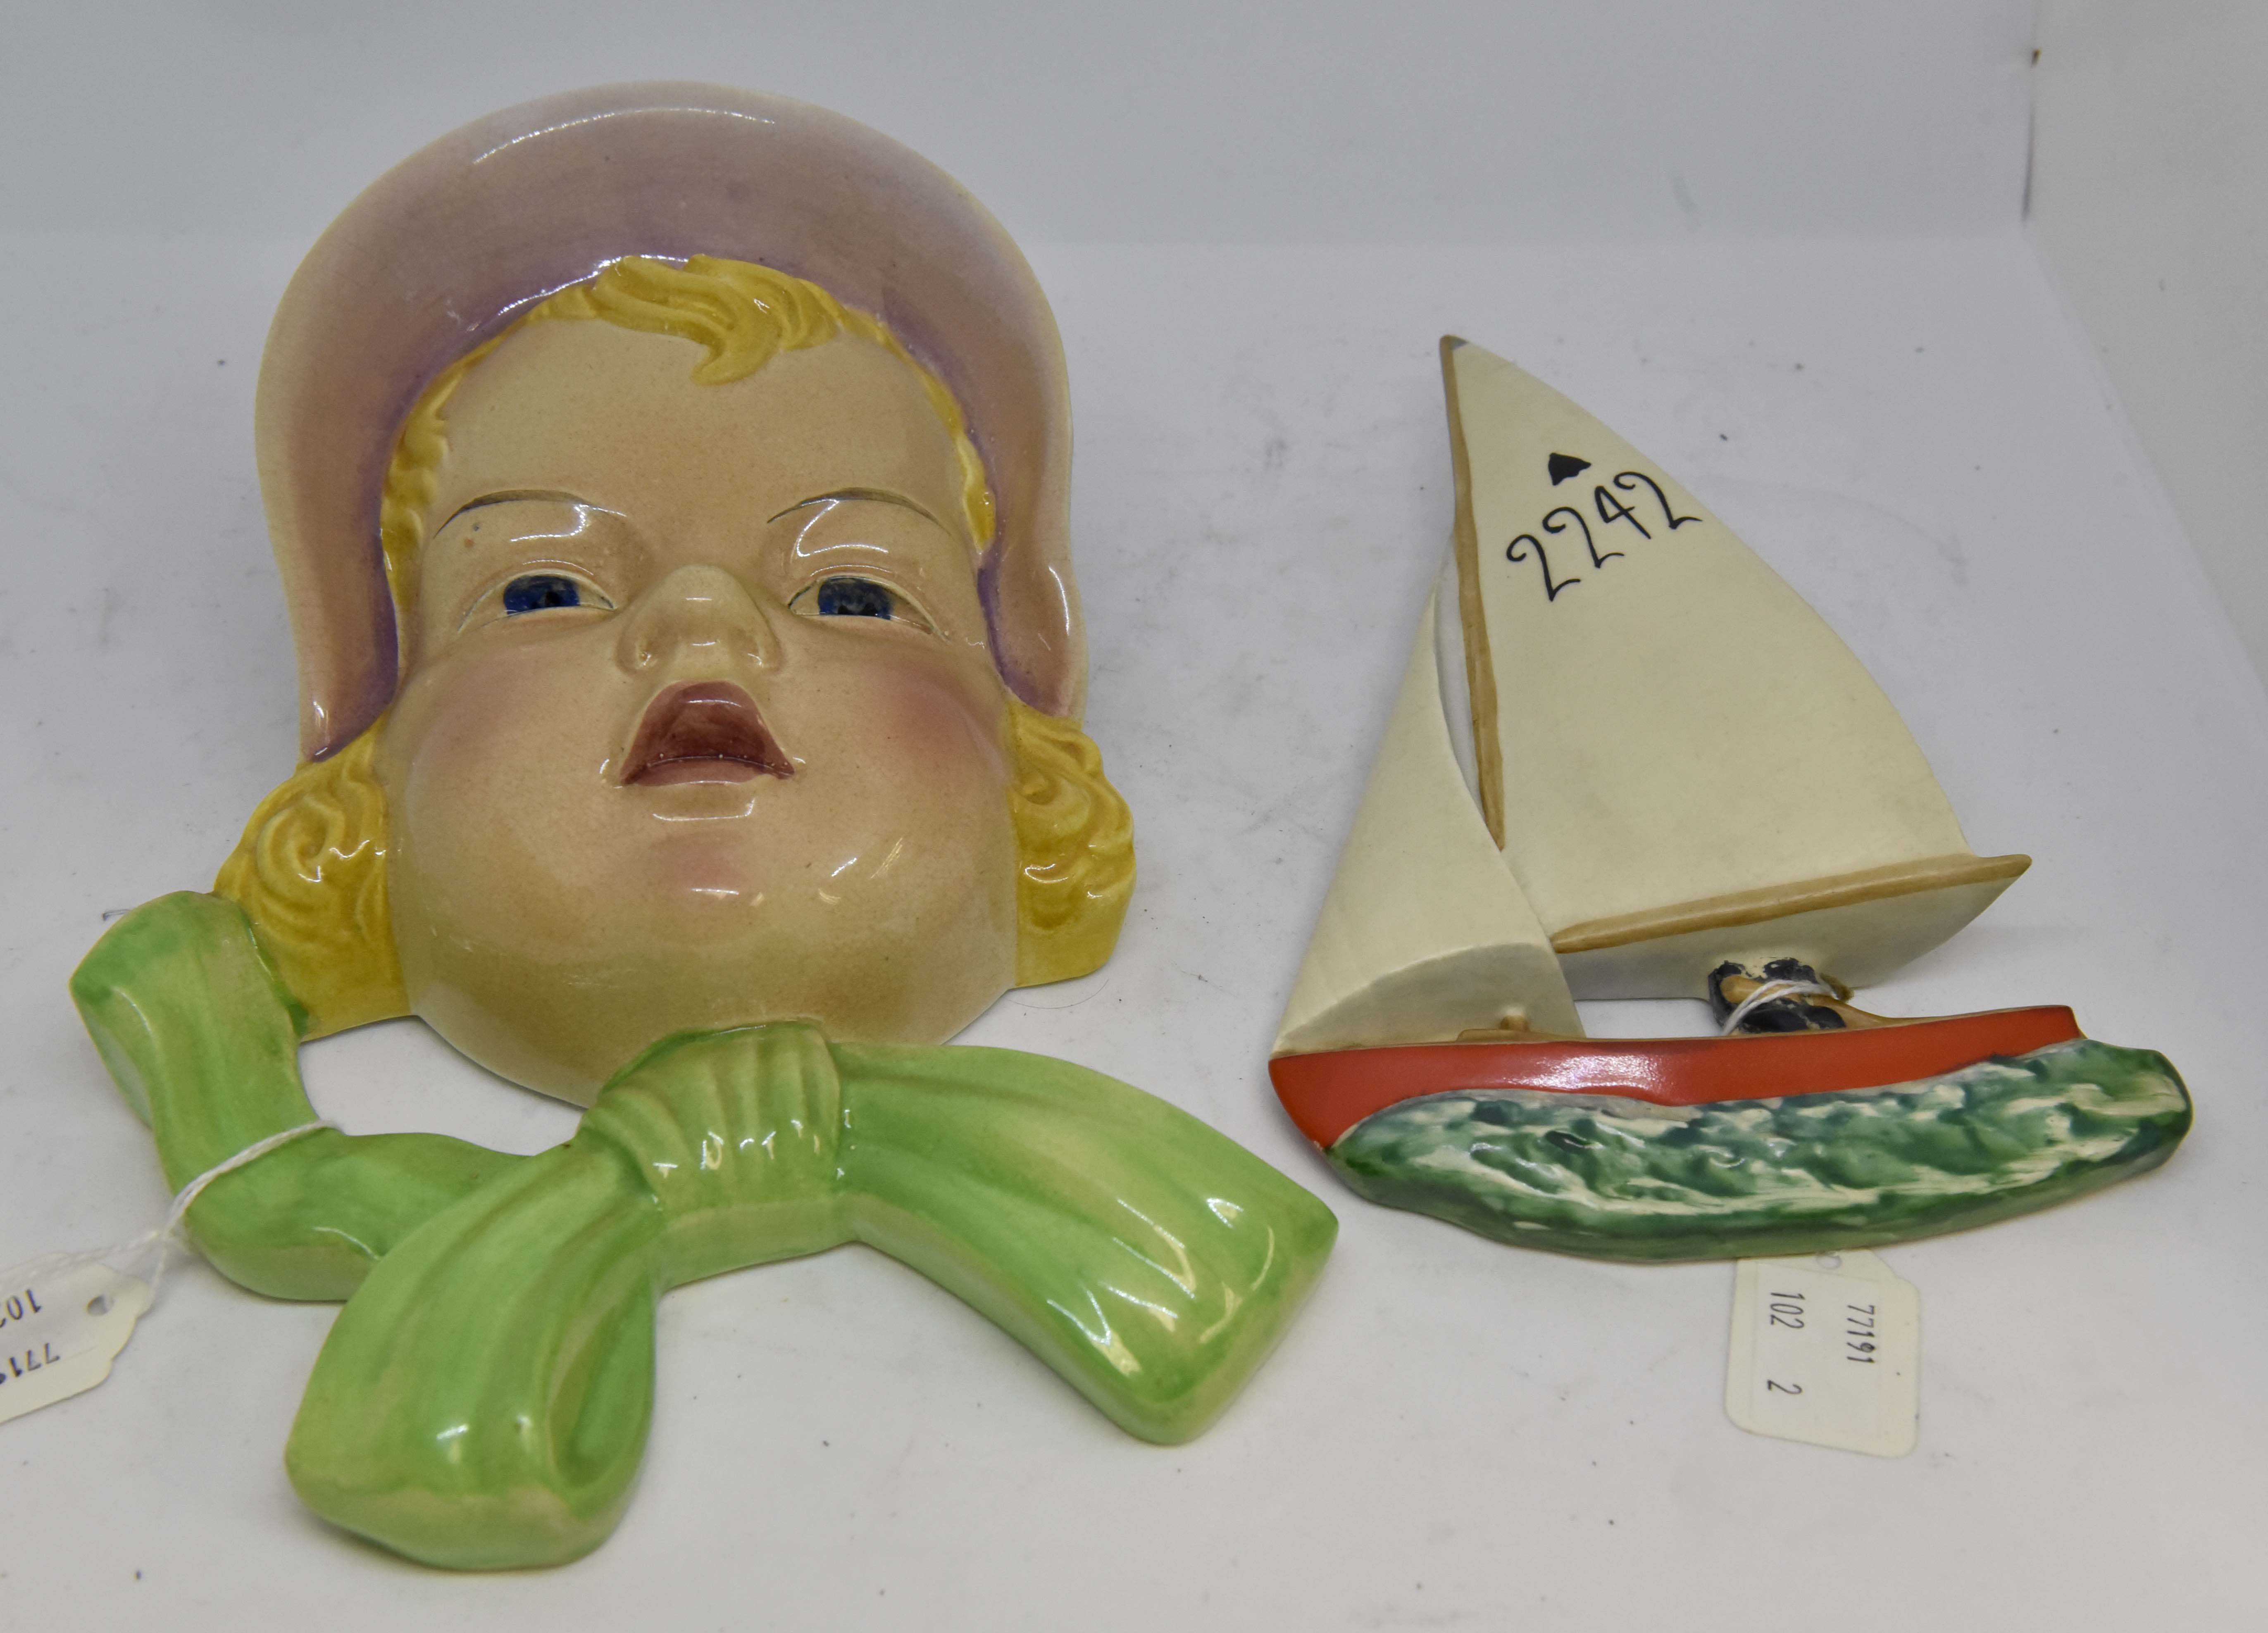 Beswick wall masks Young Girl with Bonnet 380,